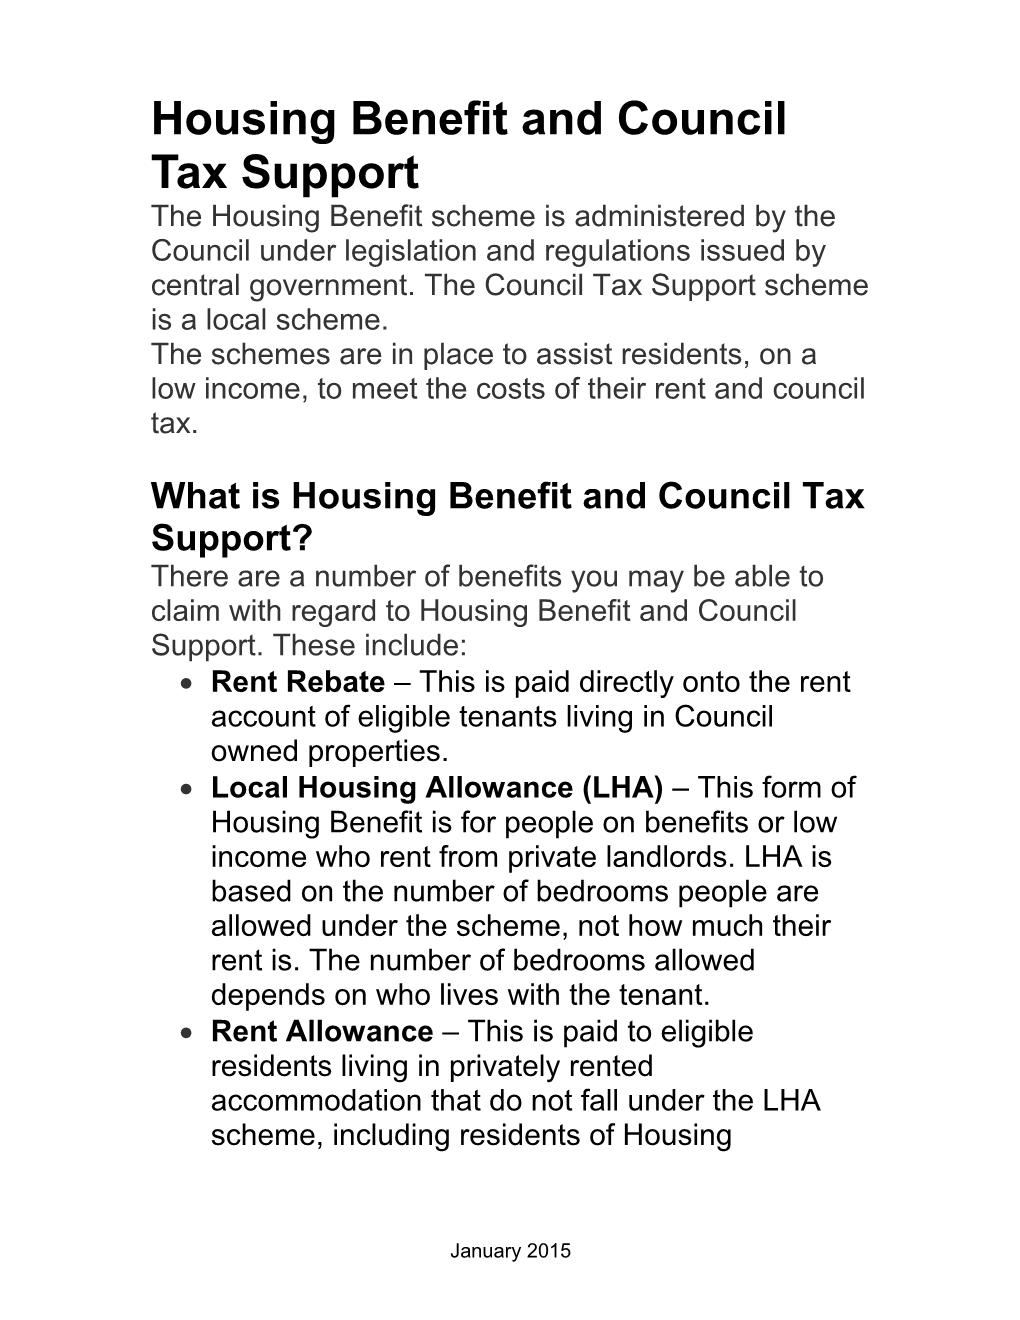 Housing Benefit and Council Tax Support